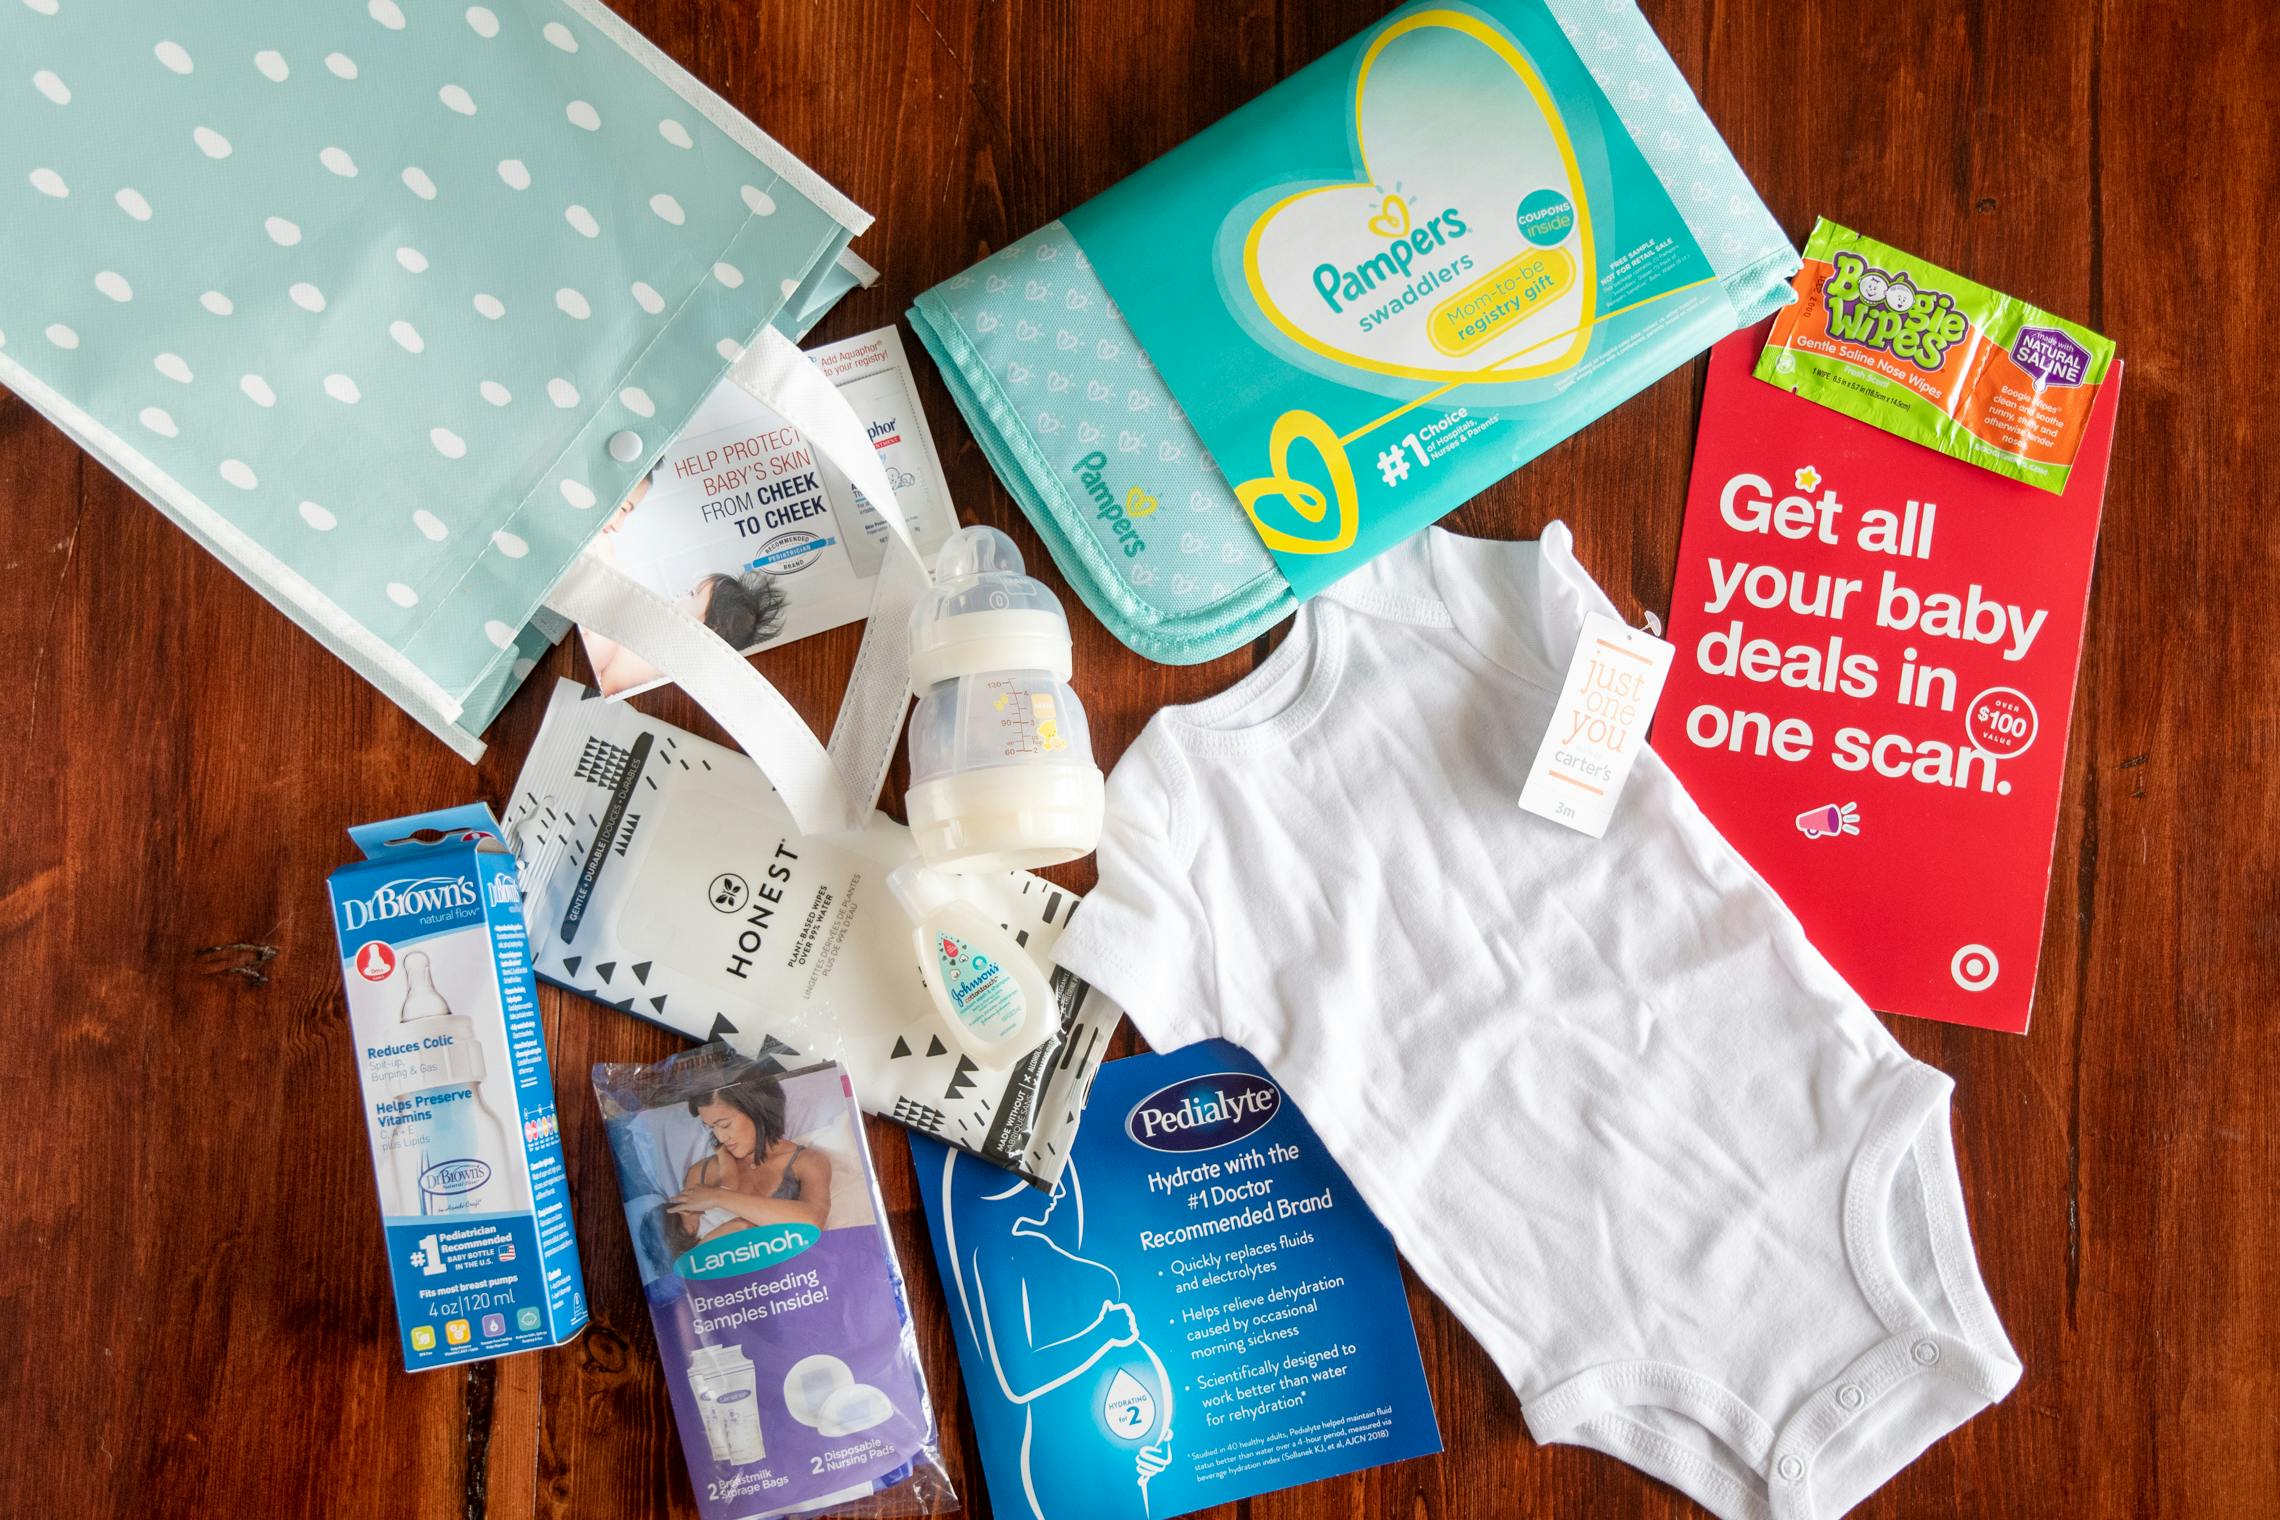 Contents of a free Target registry baby bag laid out on a wood floor.